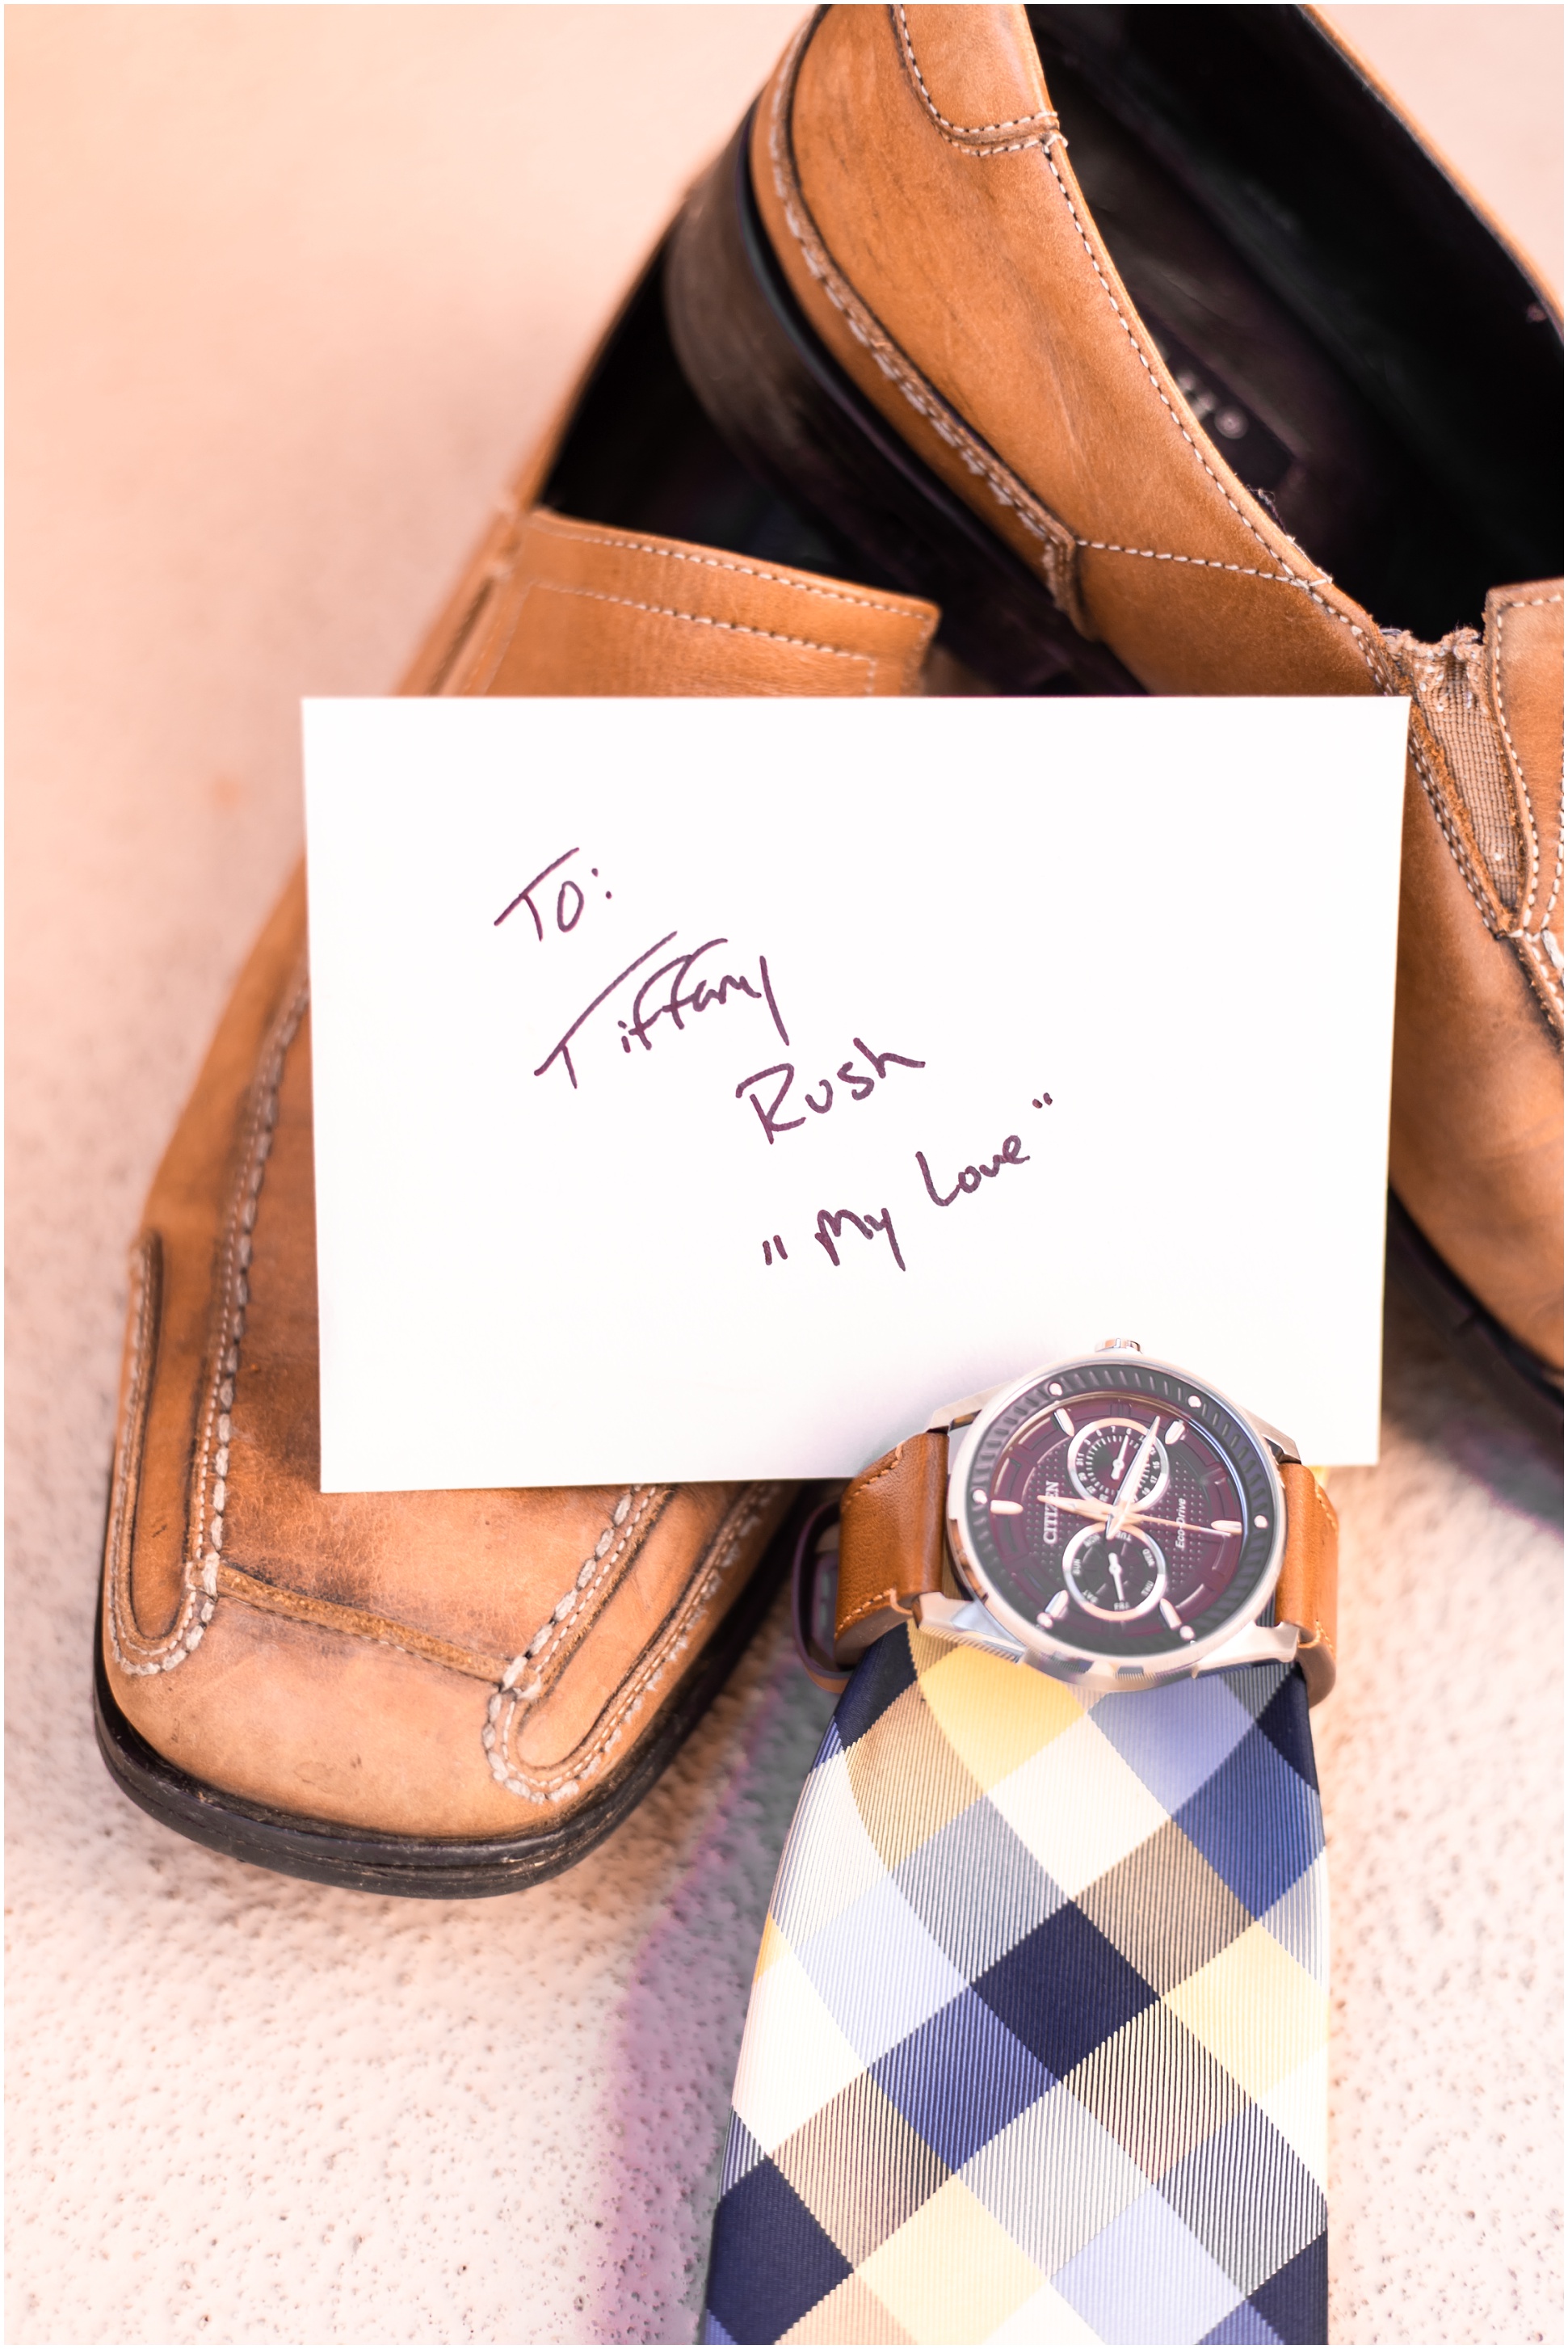 Detail shot of grooms shoes, watch, plaid tie, and the note to his love